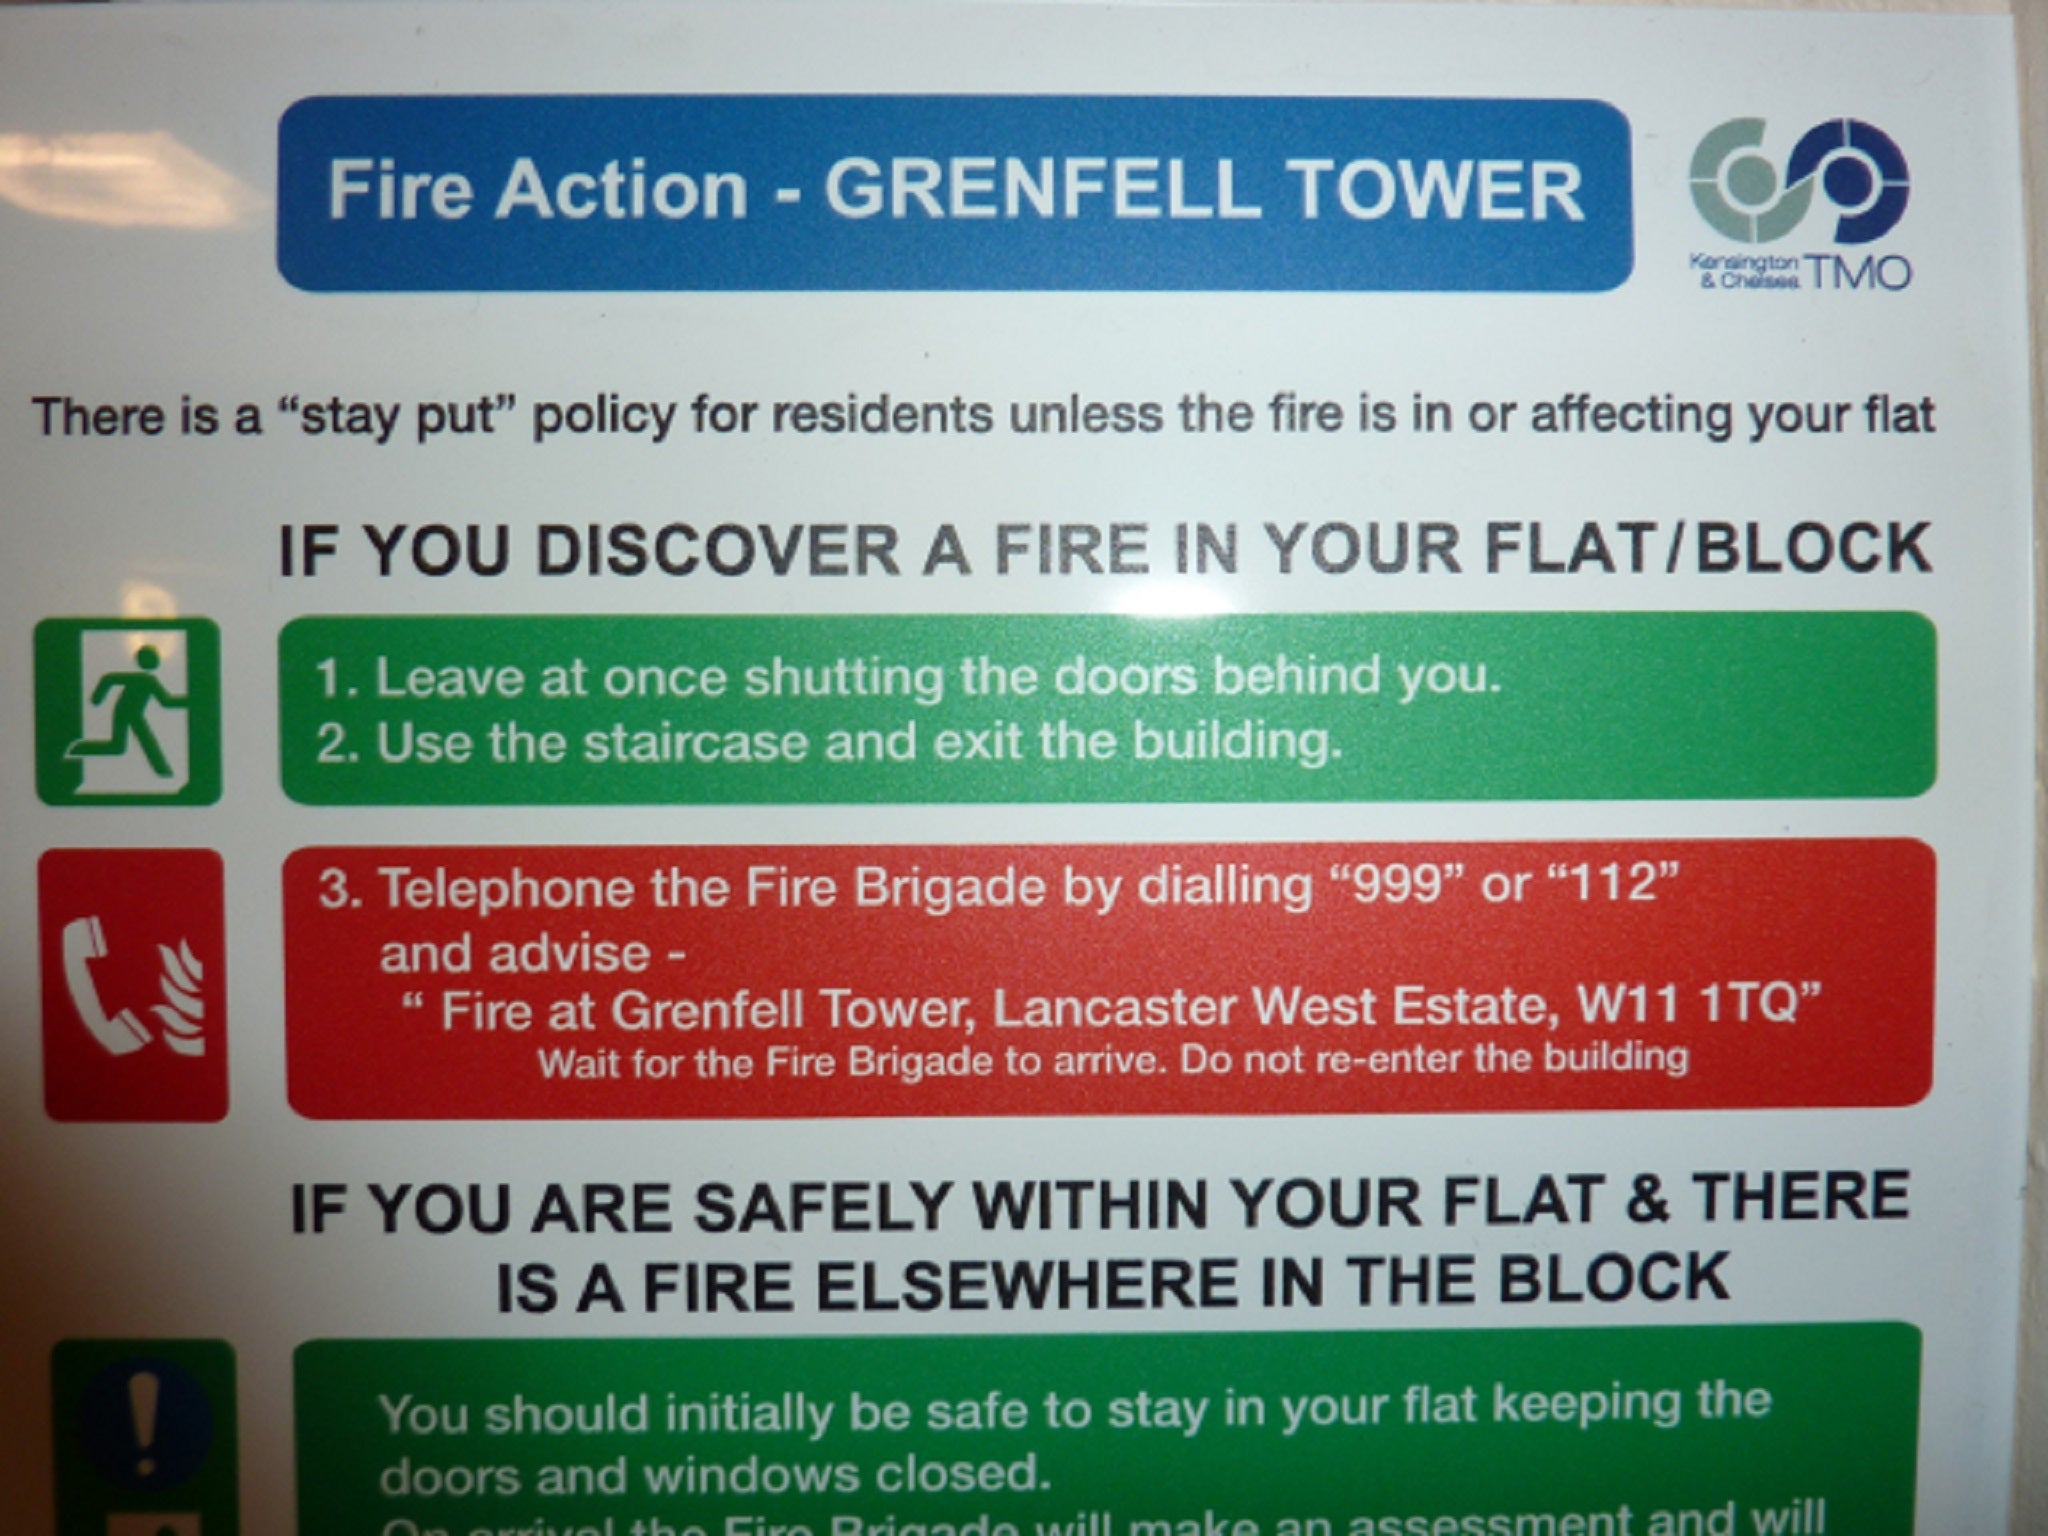 Grenfell Tower operated a "stay put" policy in the event of a fire